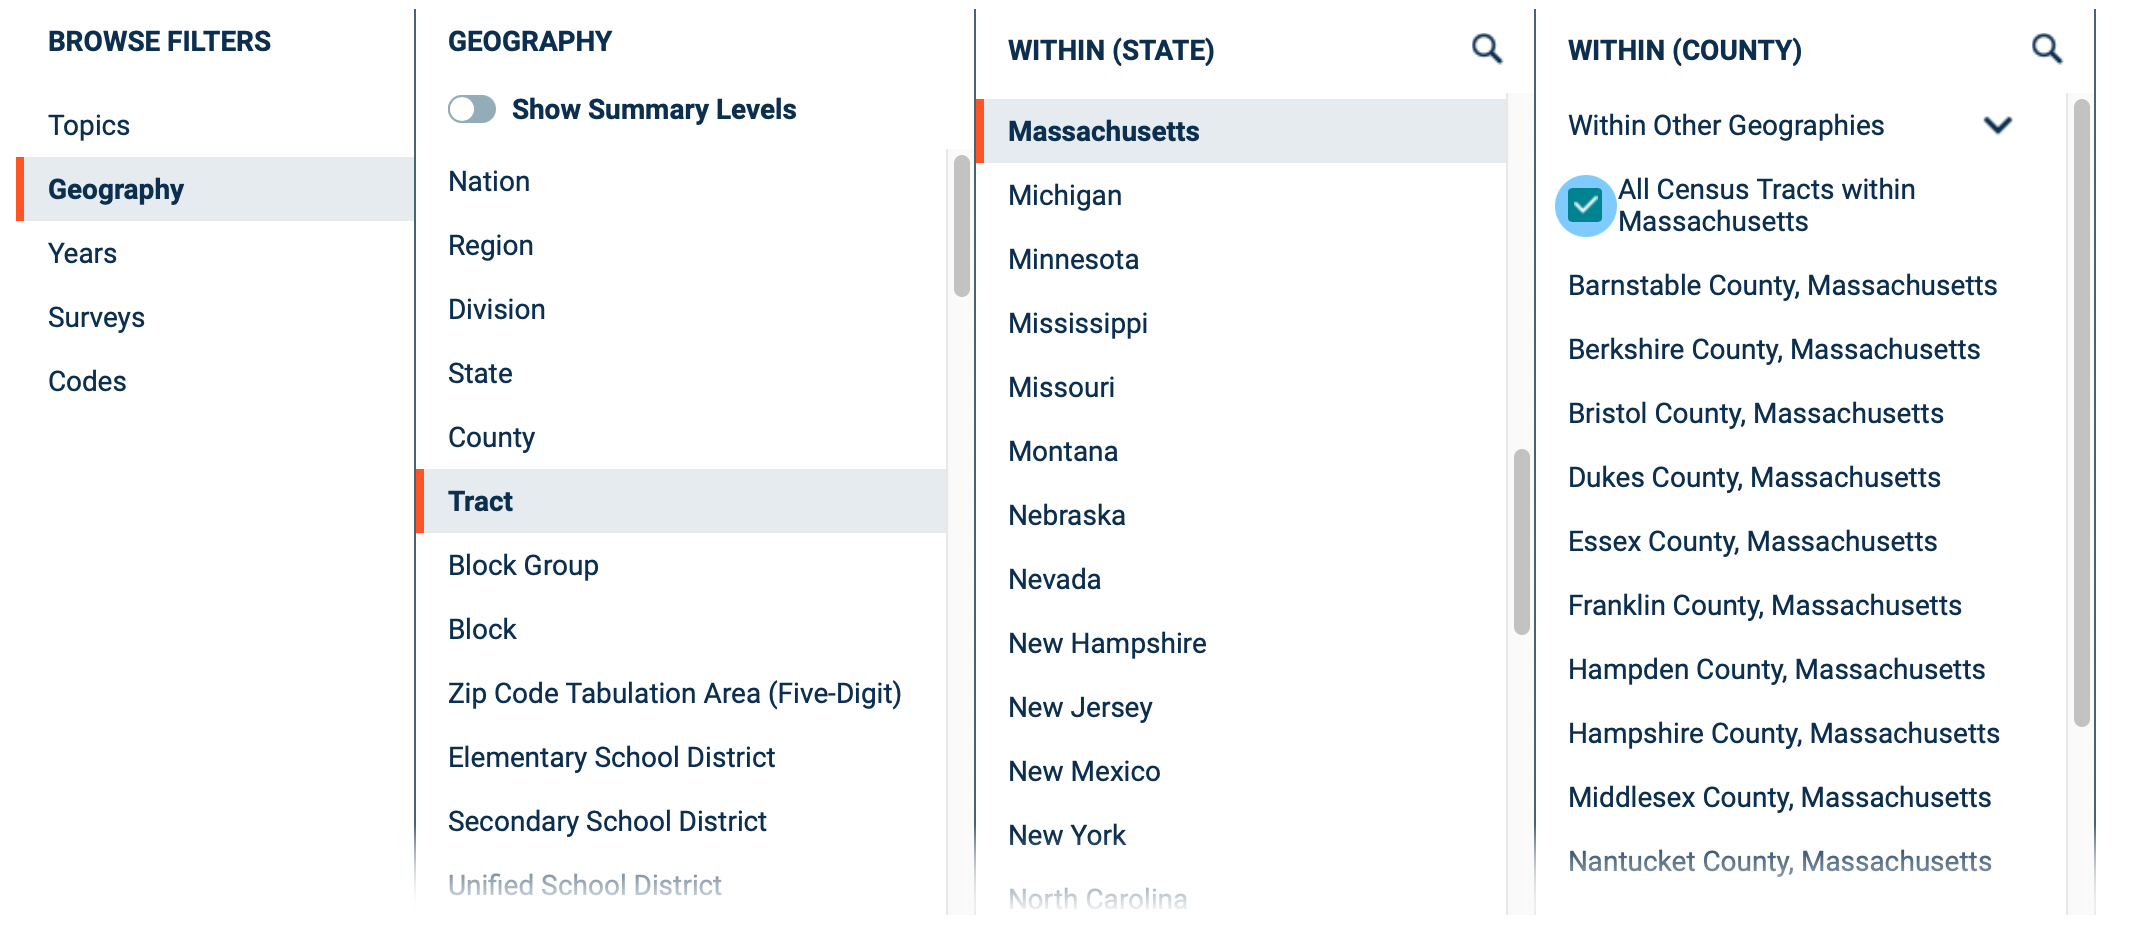 Screenshot of the filter menu on the Explore Census Data portal, showing the options to select for narrowing down the results to the geographical entity of all census tracts within Massachusetts